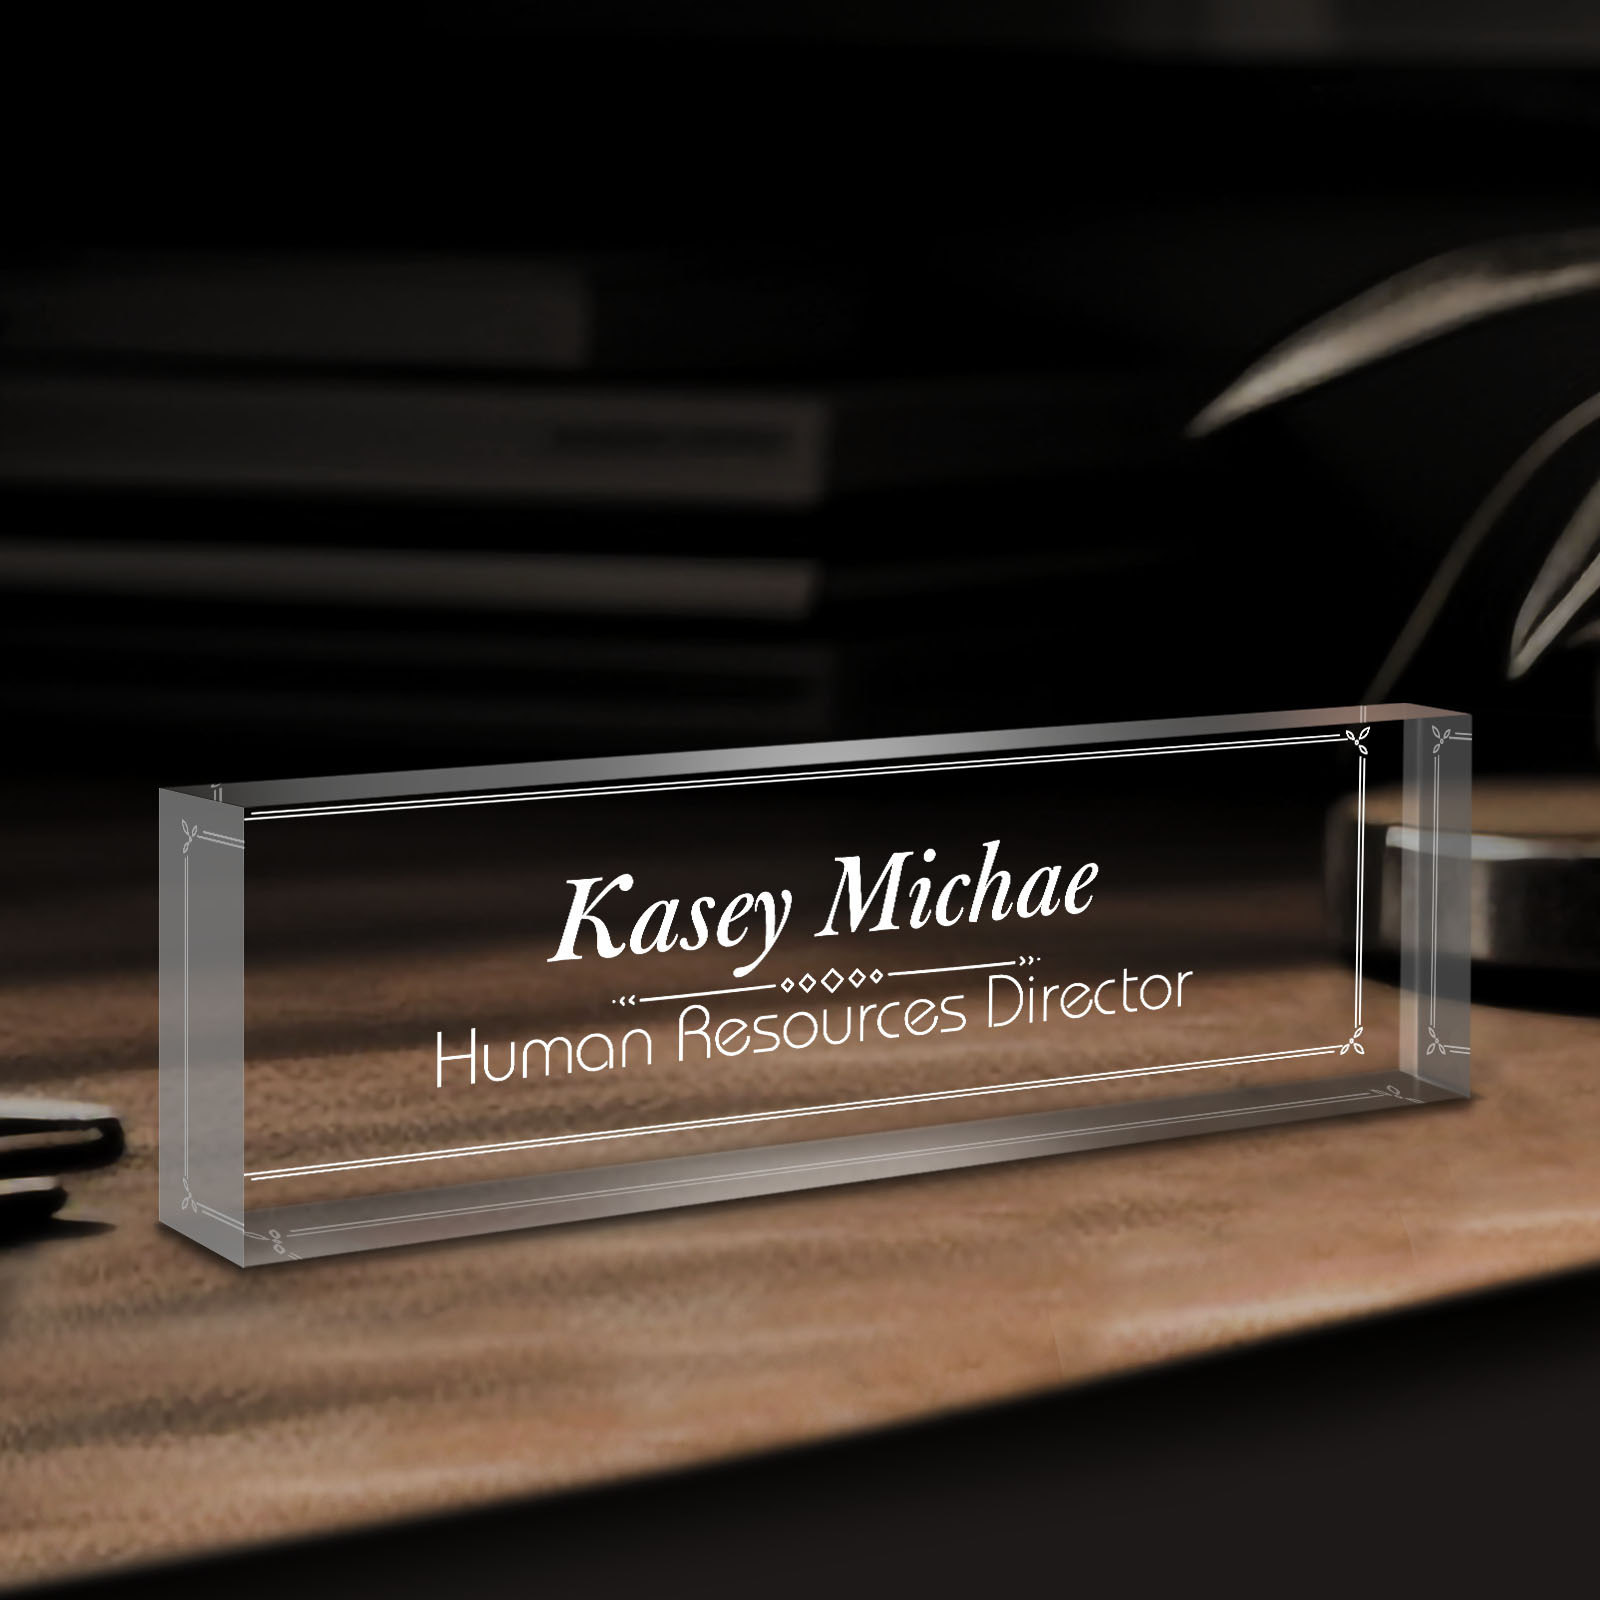 

1pc, Office Engraved Acrylic Name Plate For Desk, Desk Name Plate Personalized Custom Employee Appreciation Gifts |office Gifts For Women, Boss, Employee, Teacher, Manager, Gifts For Employees